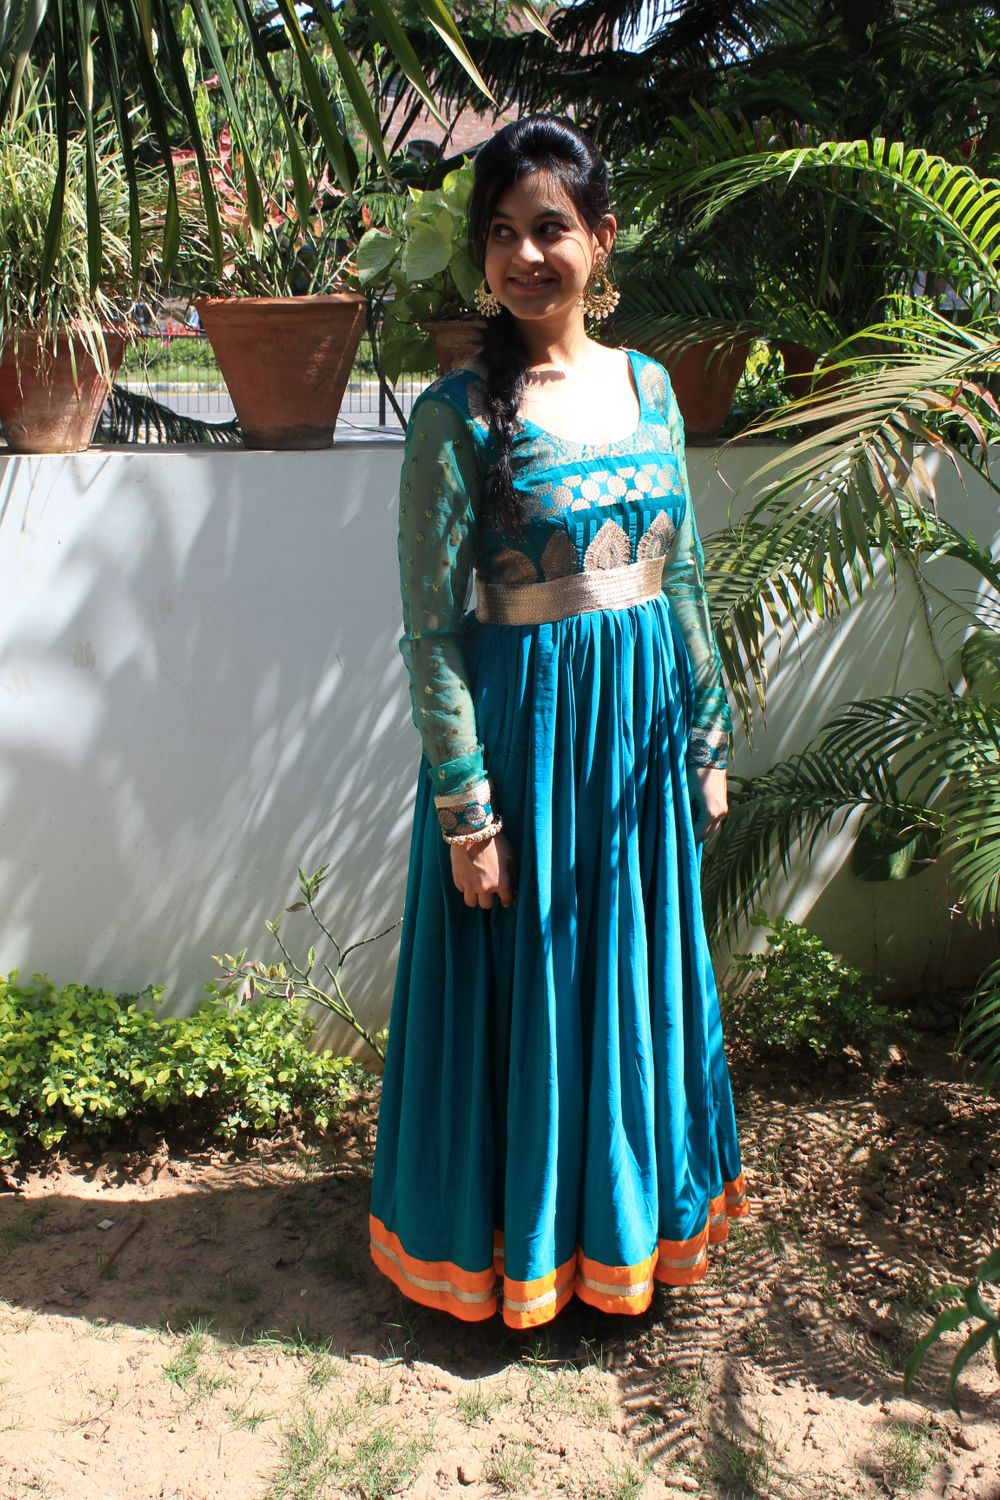 Photo From Turquoise gown - By Paridhaa